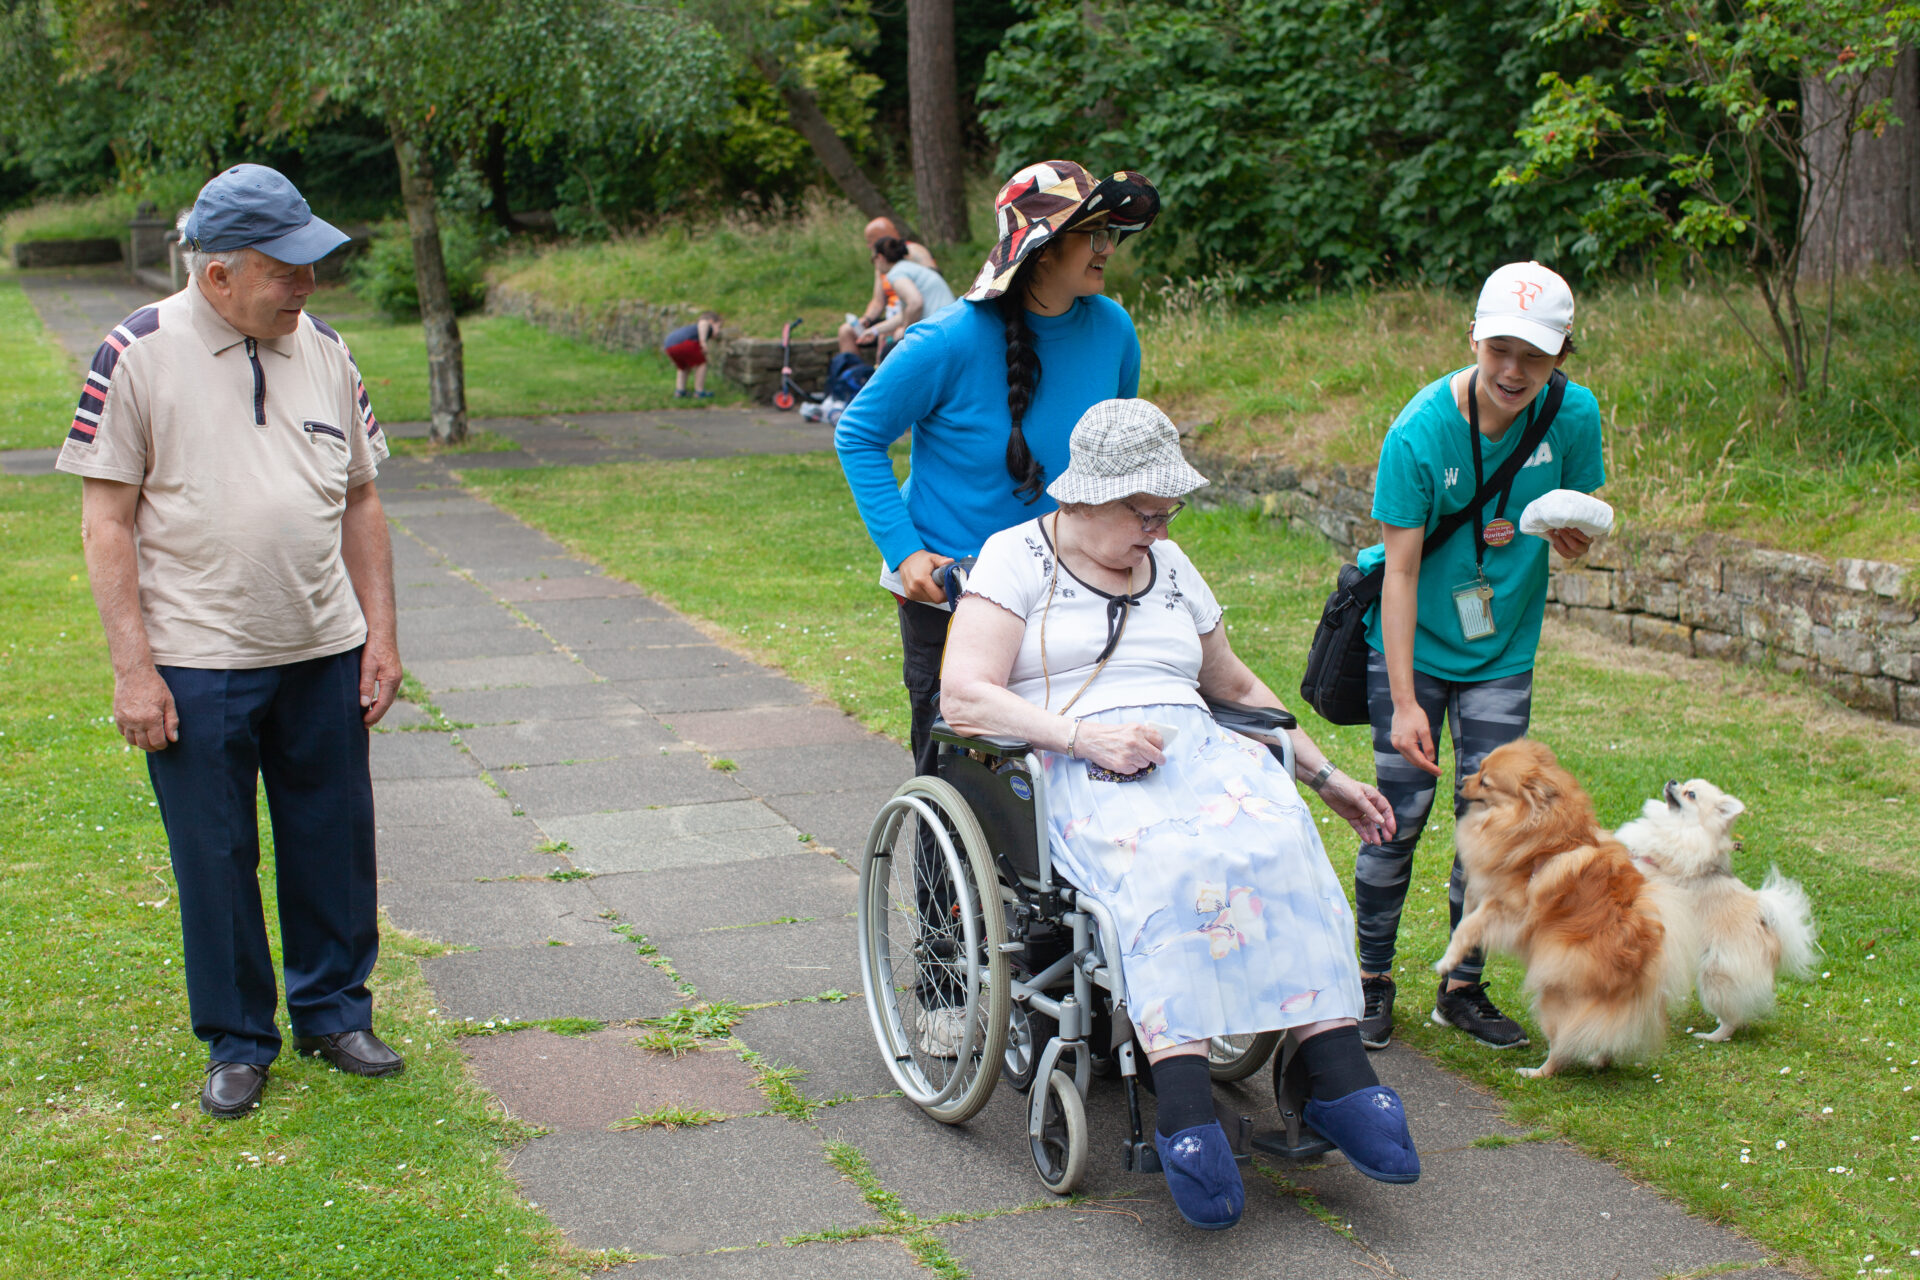 Woman in wheelchair petting two pomeranian dogs while on a walk with an older man and two young women